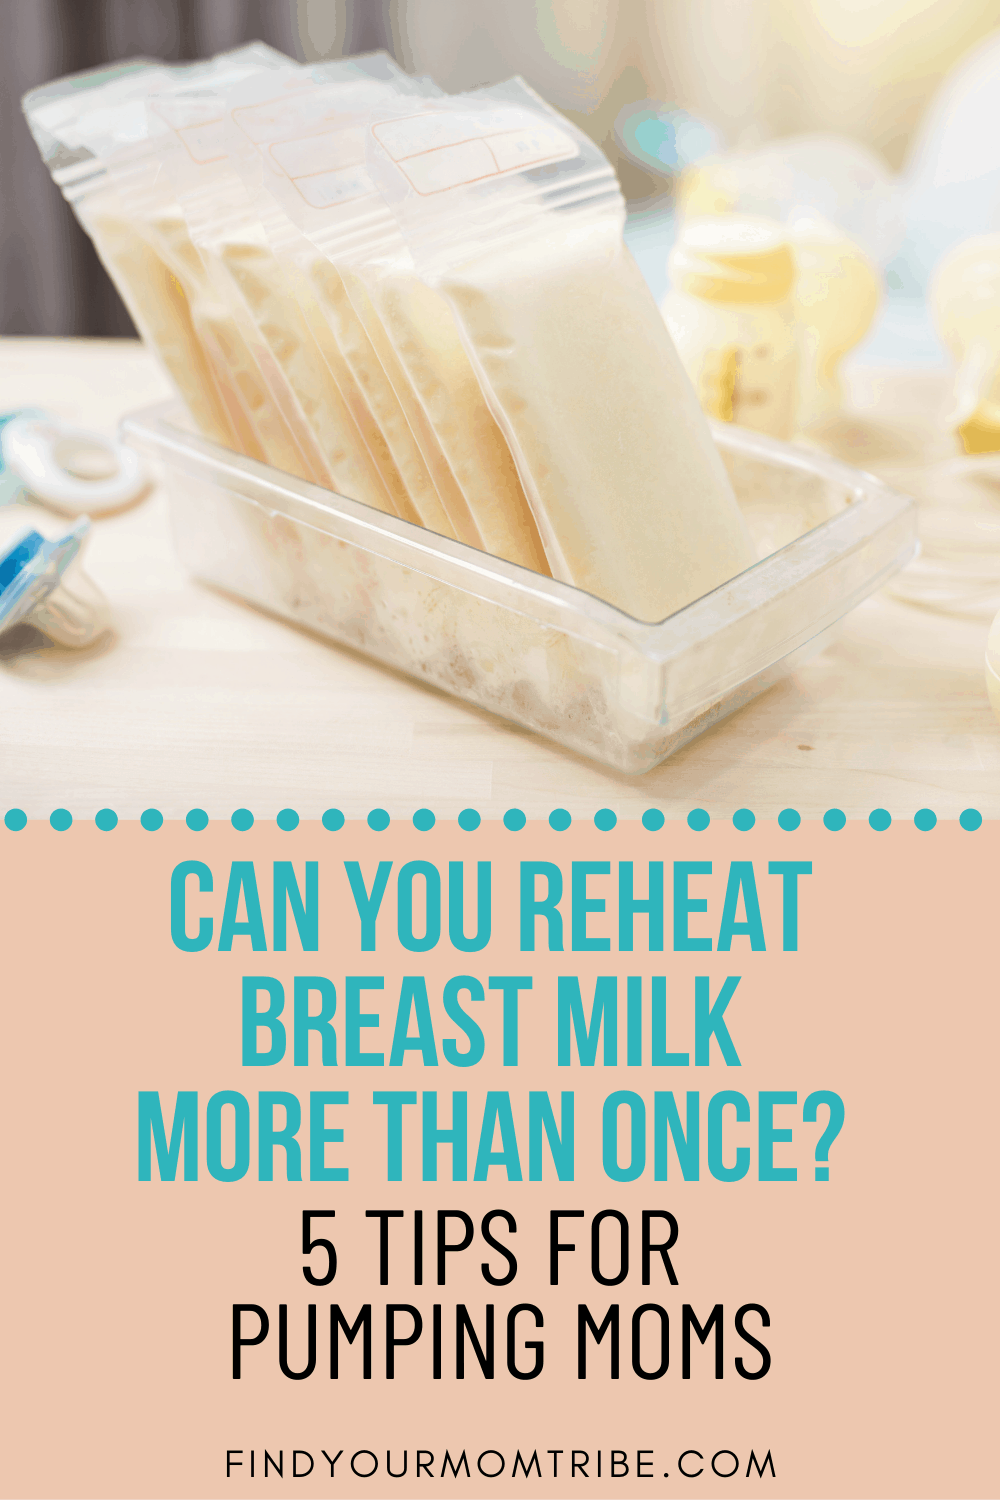 Pinterest can you reheat breast milk more than once